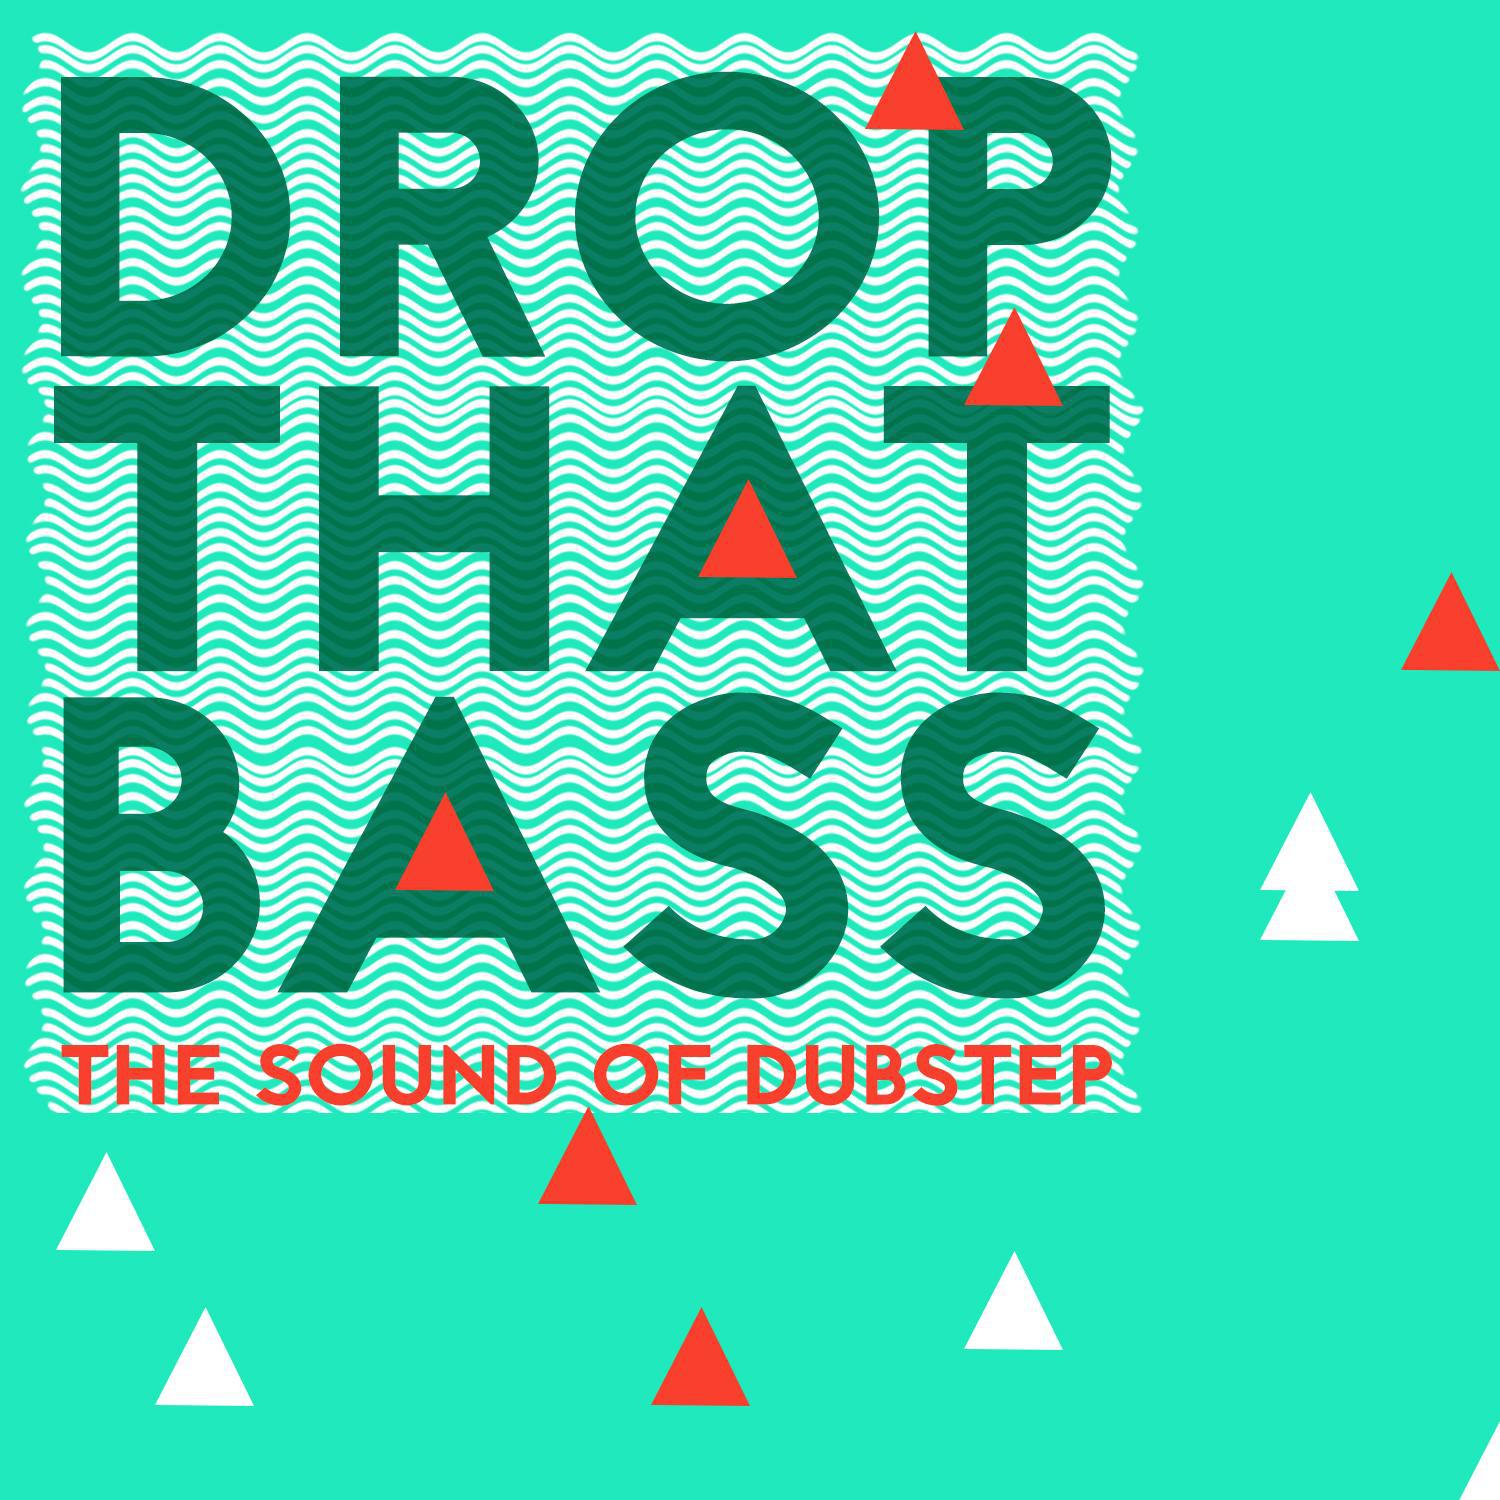 Drop That Bass: The Sound of Dubstep